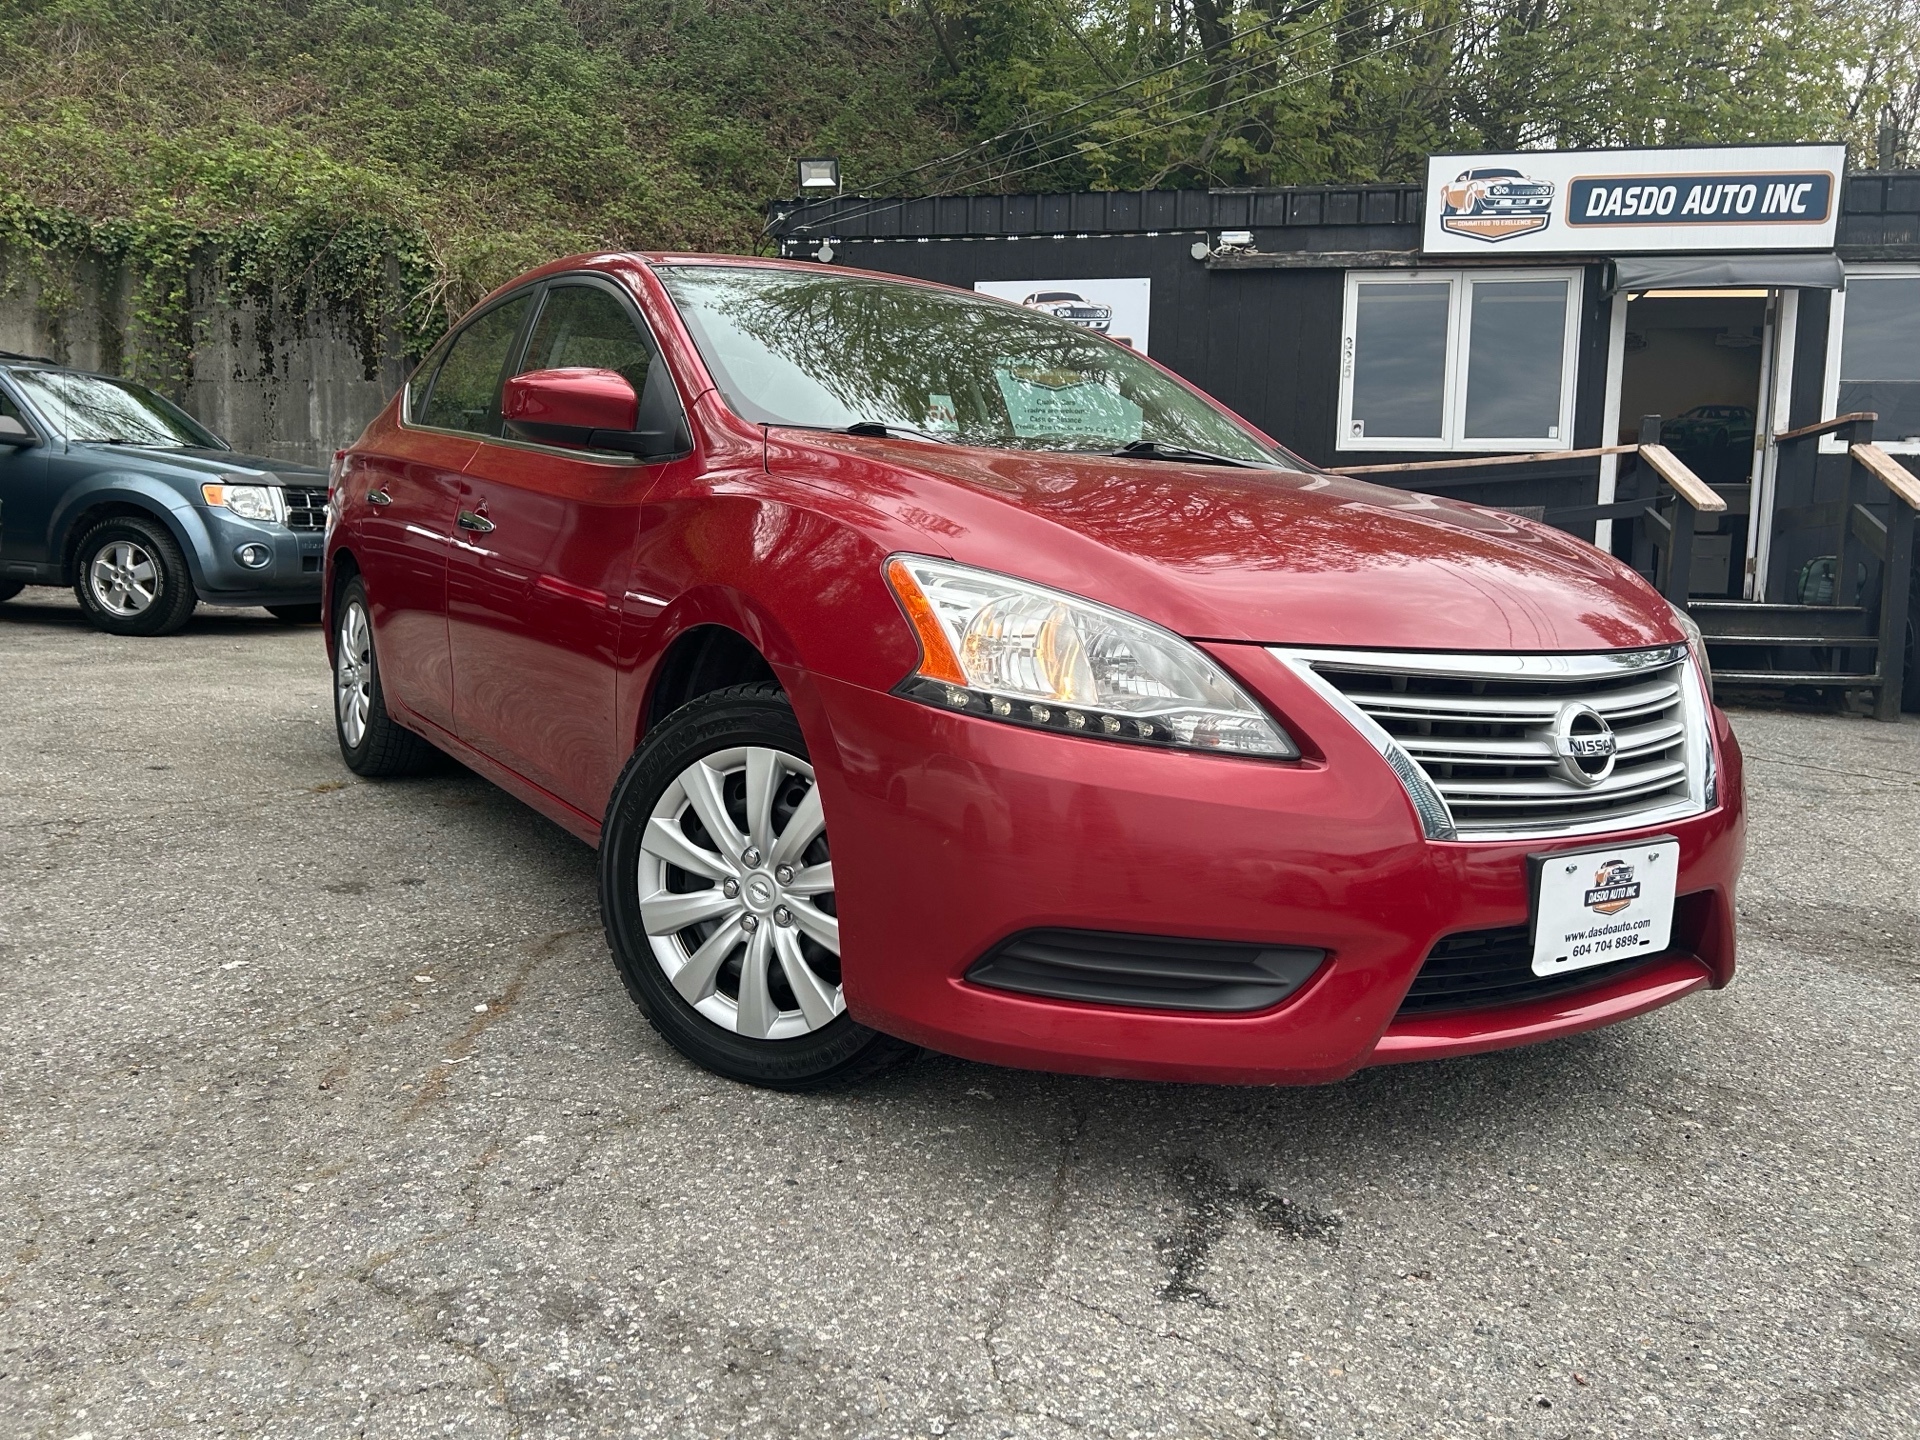 2013 Nissan Sentra S FWD - Low Km, No Accident!